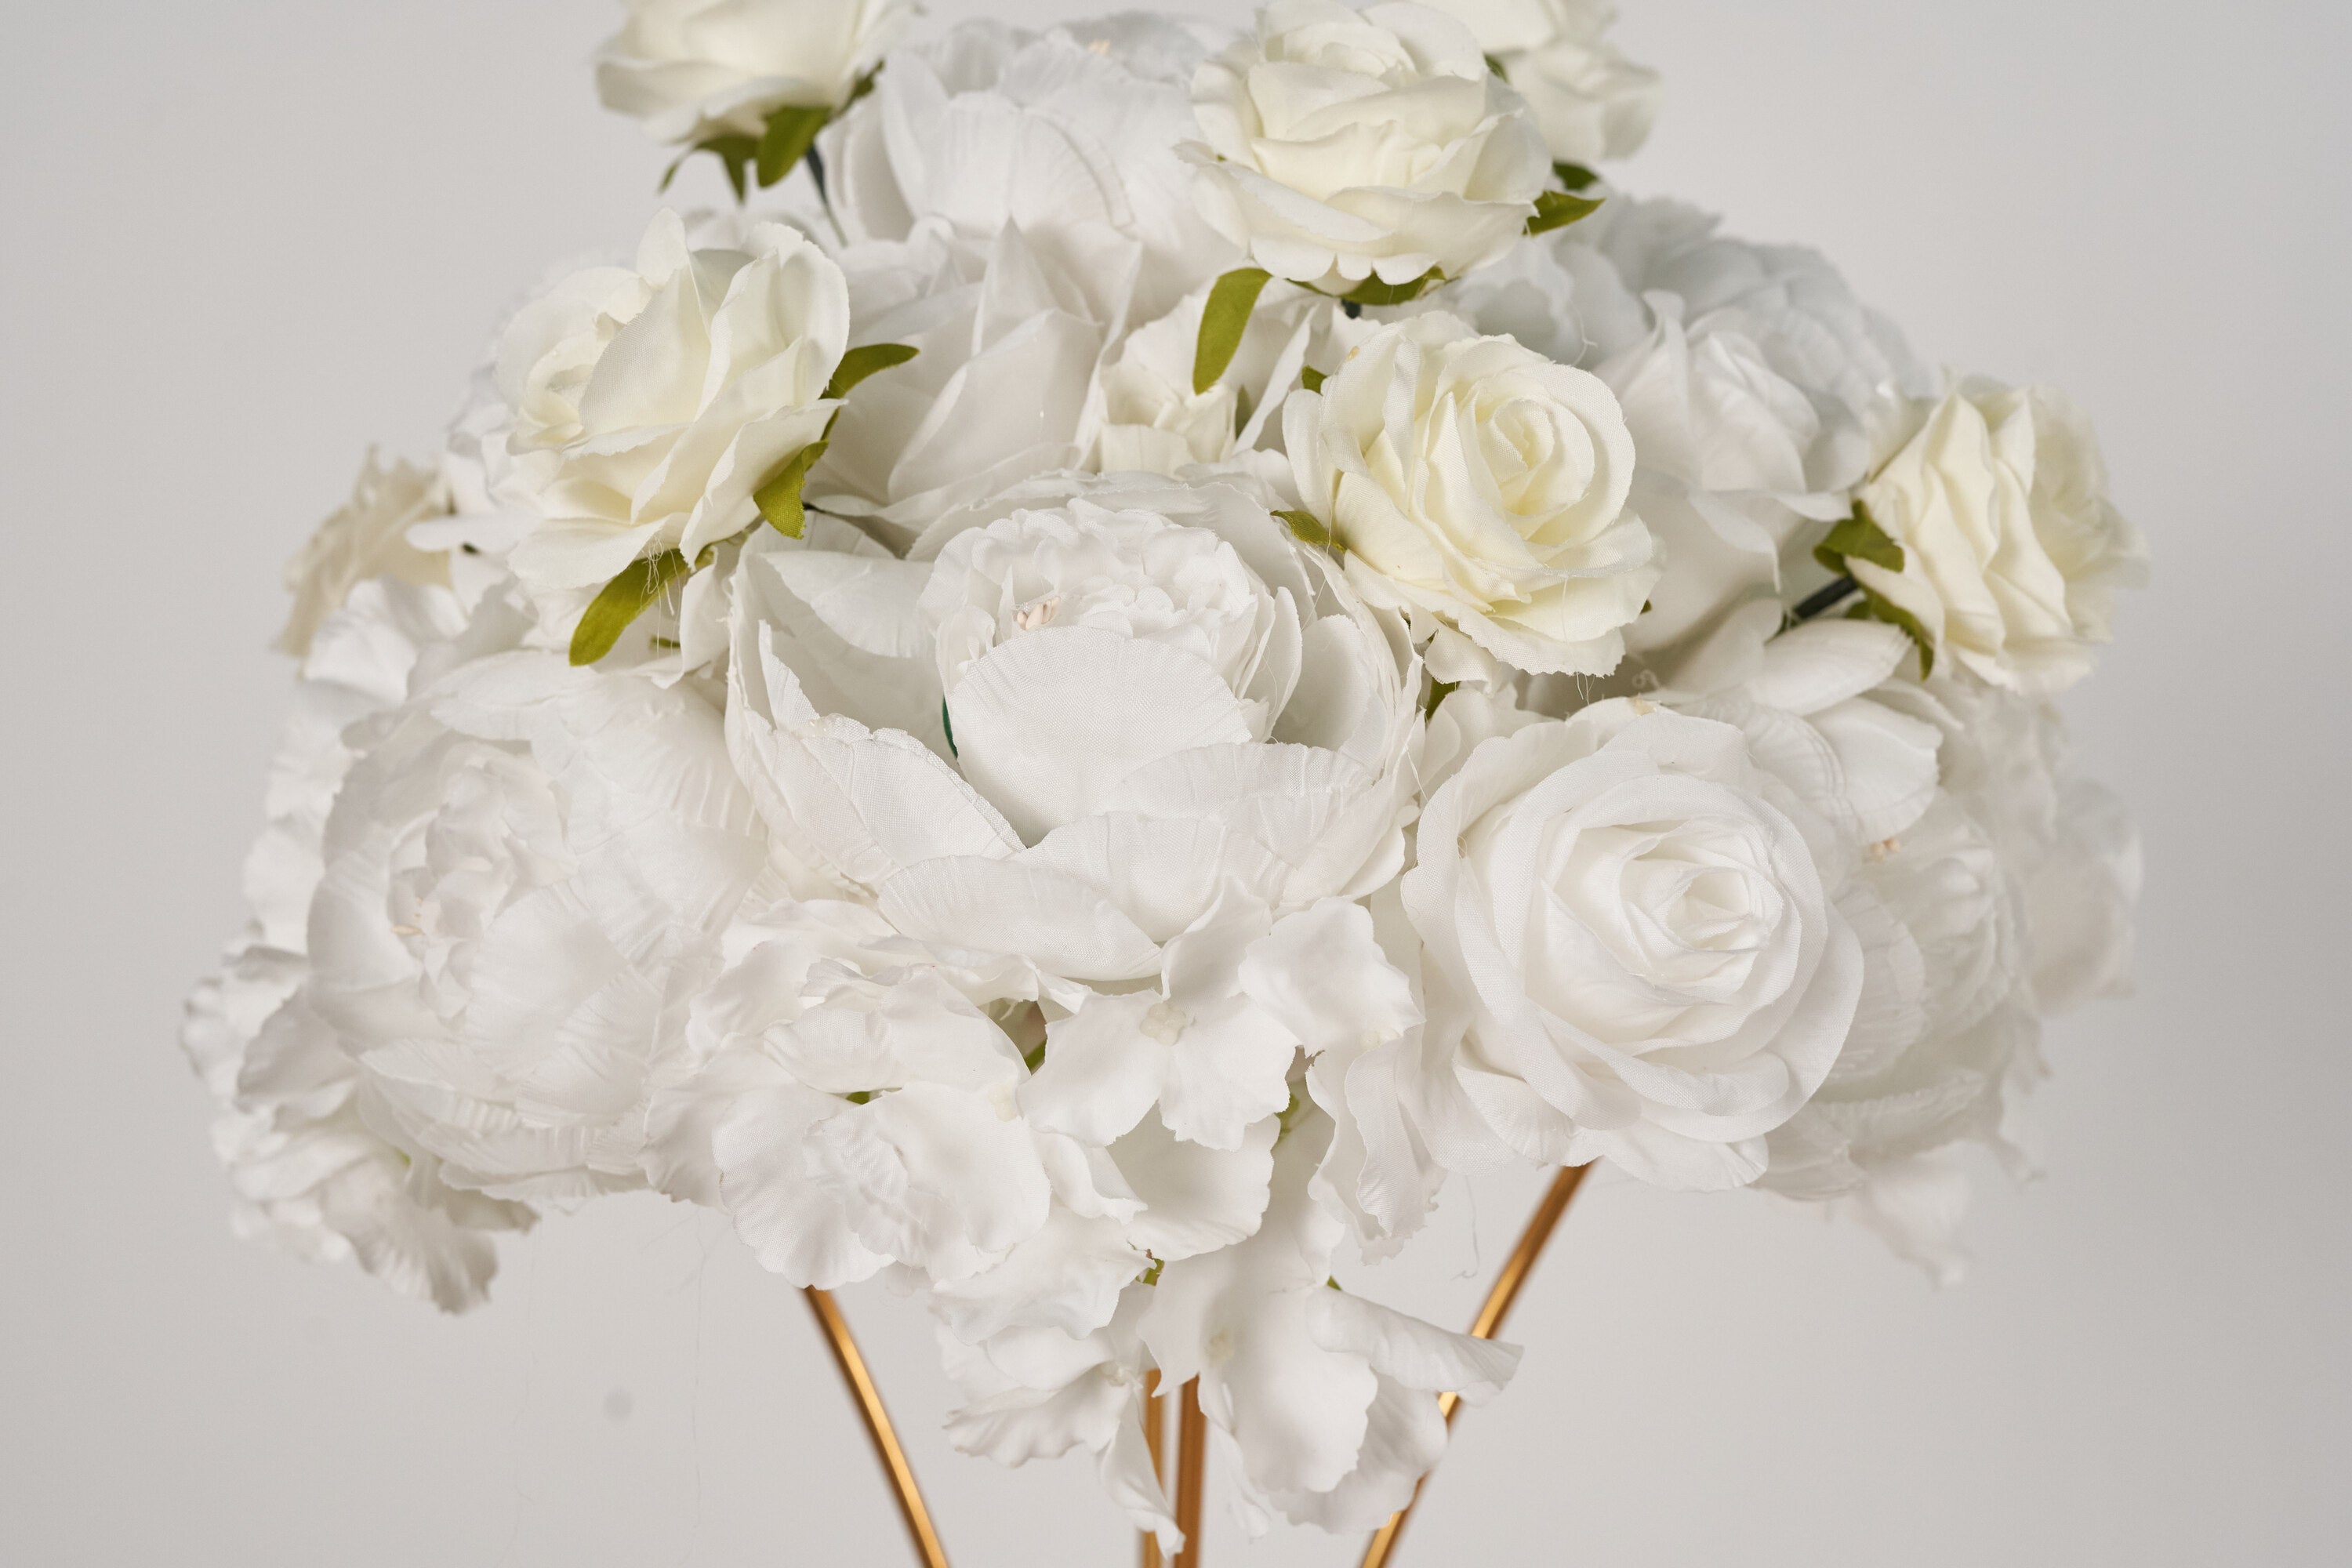 Flower Ball Pure White Roses Wedding Proposal Party Centerpieces Decor